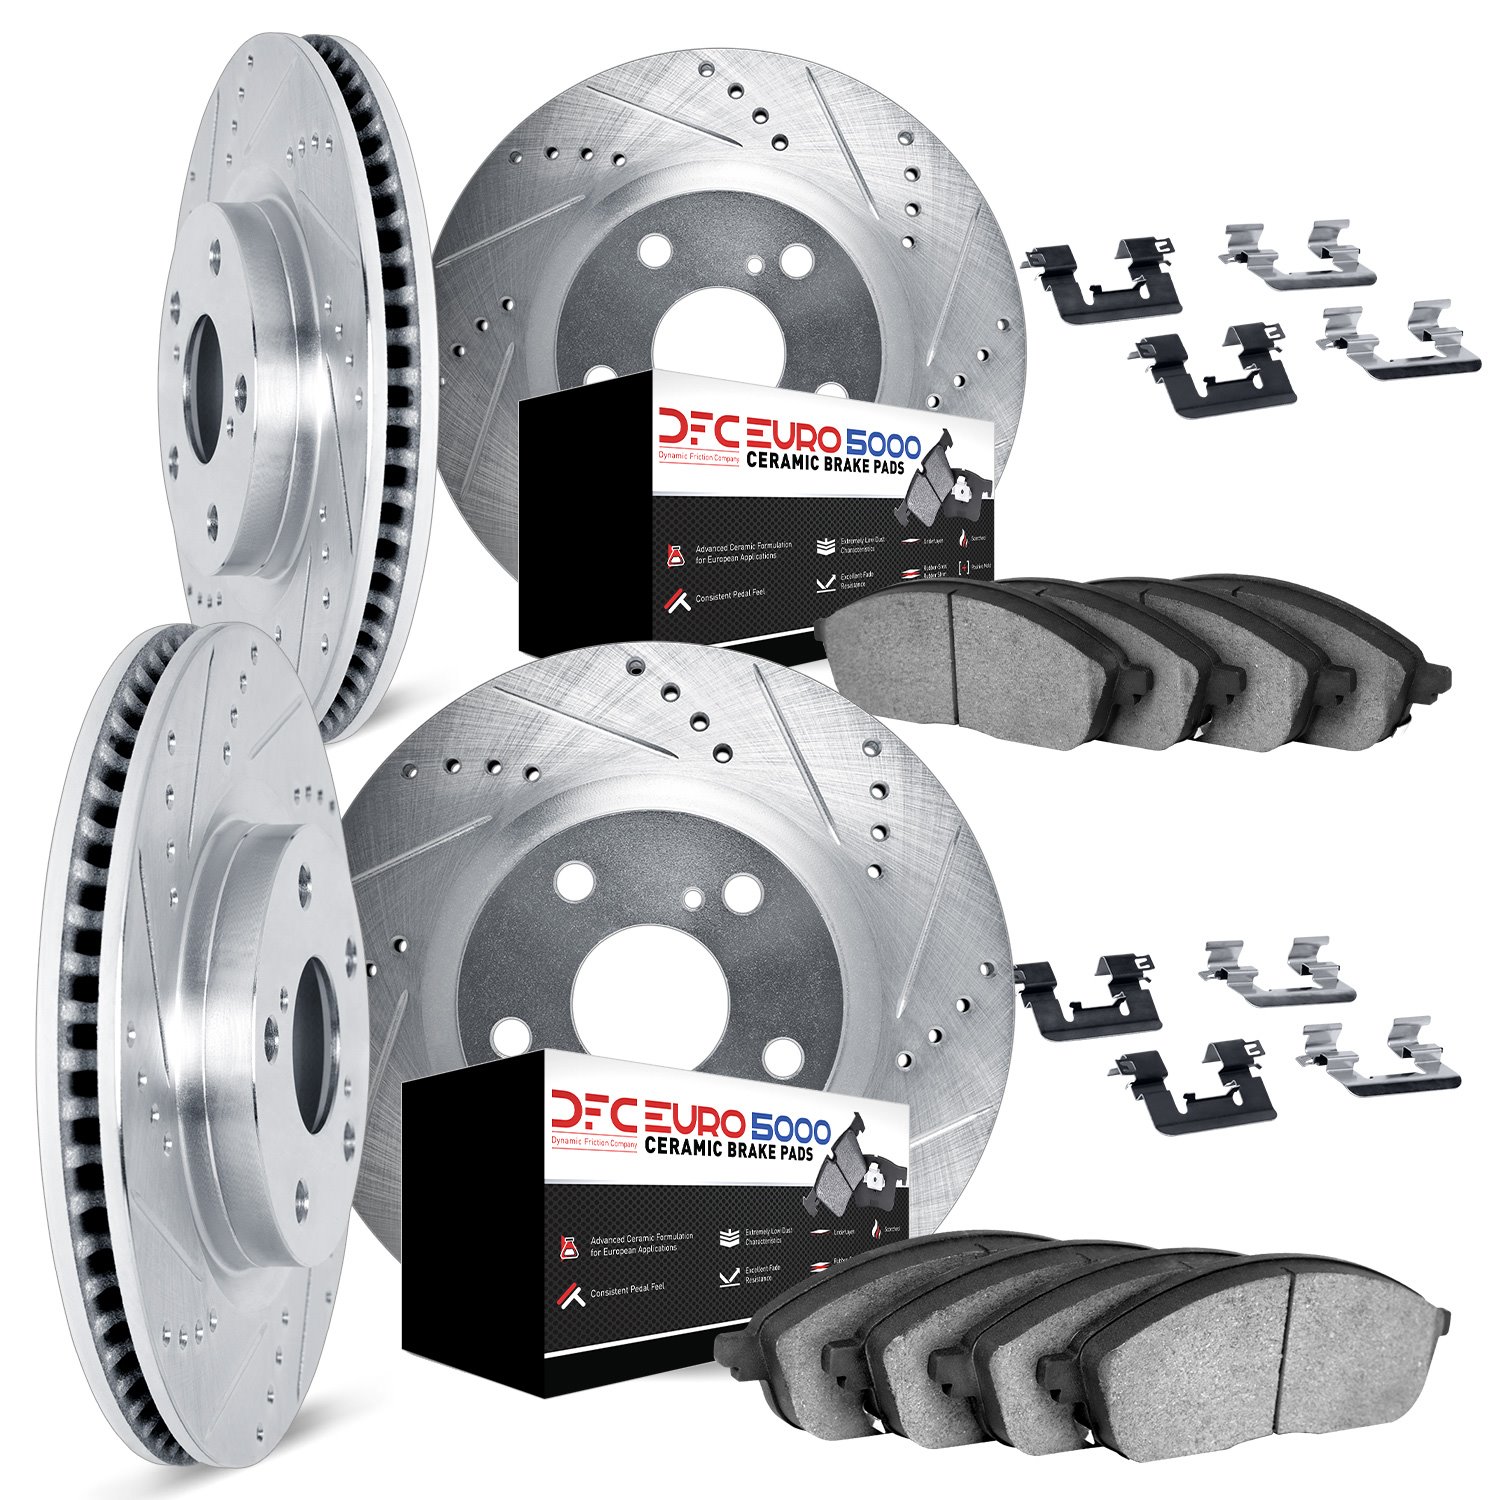 7614-31010 Drilled/Slotted Brake Rotors w/5000 Euro Ceramic Brake Pads Kit & Hardware [Silver], 1997-1999 BMW, Position: Front a